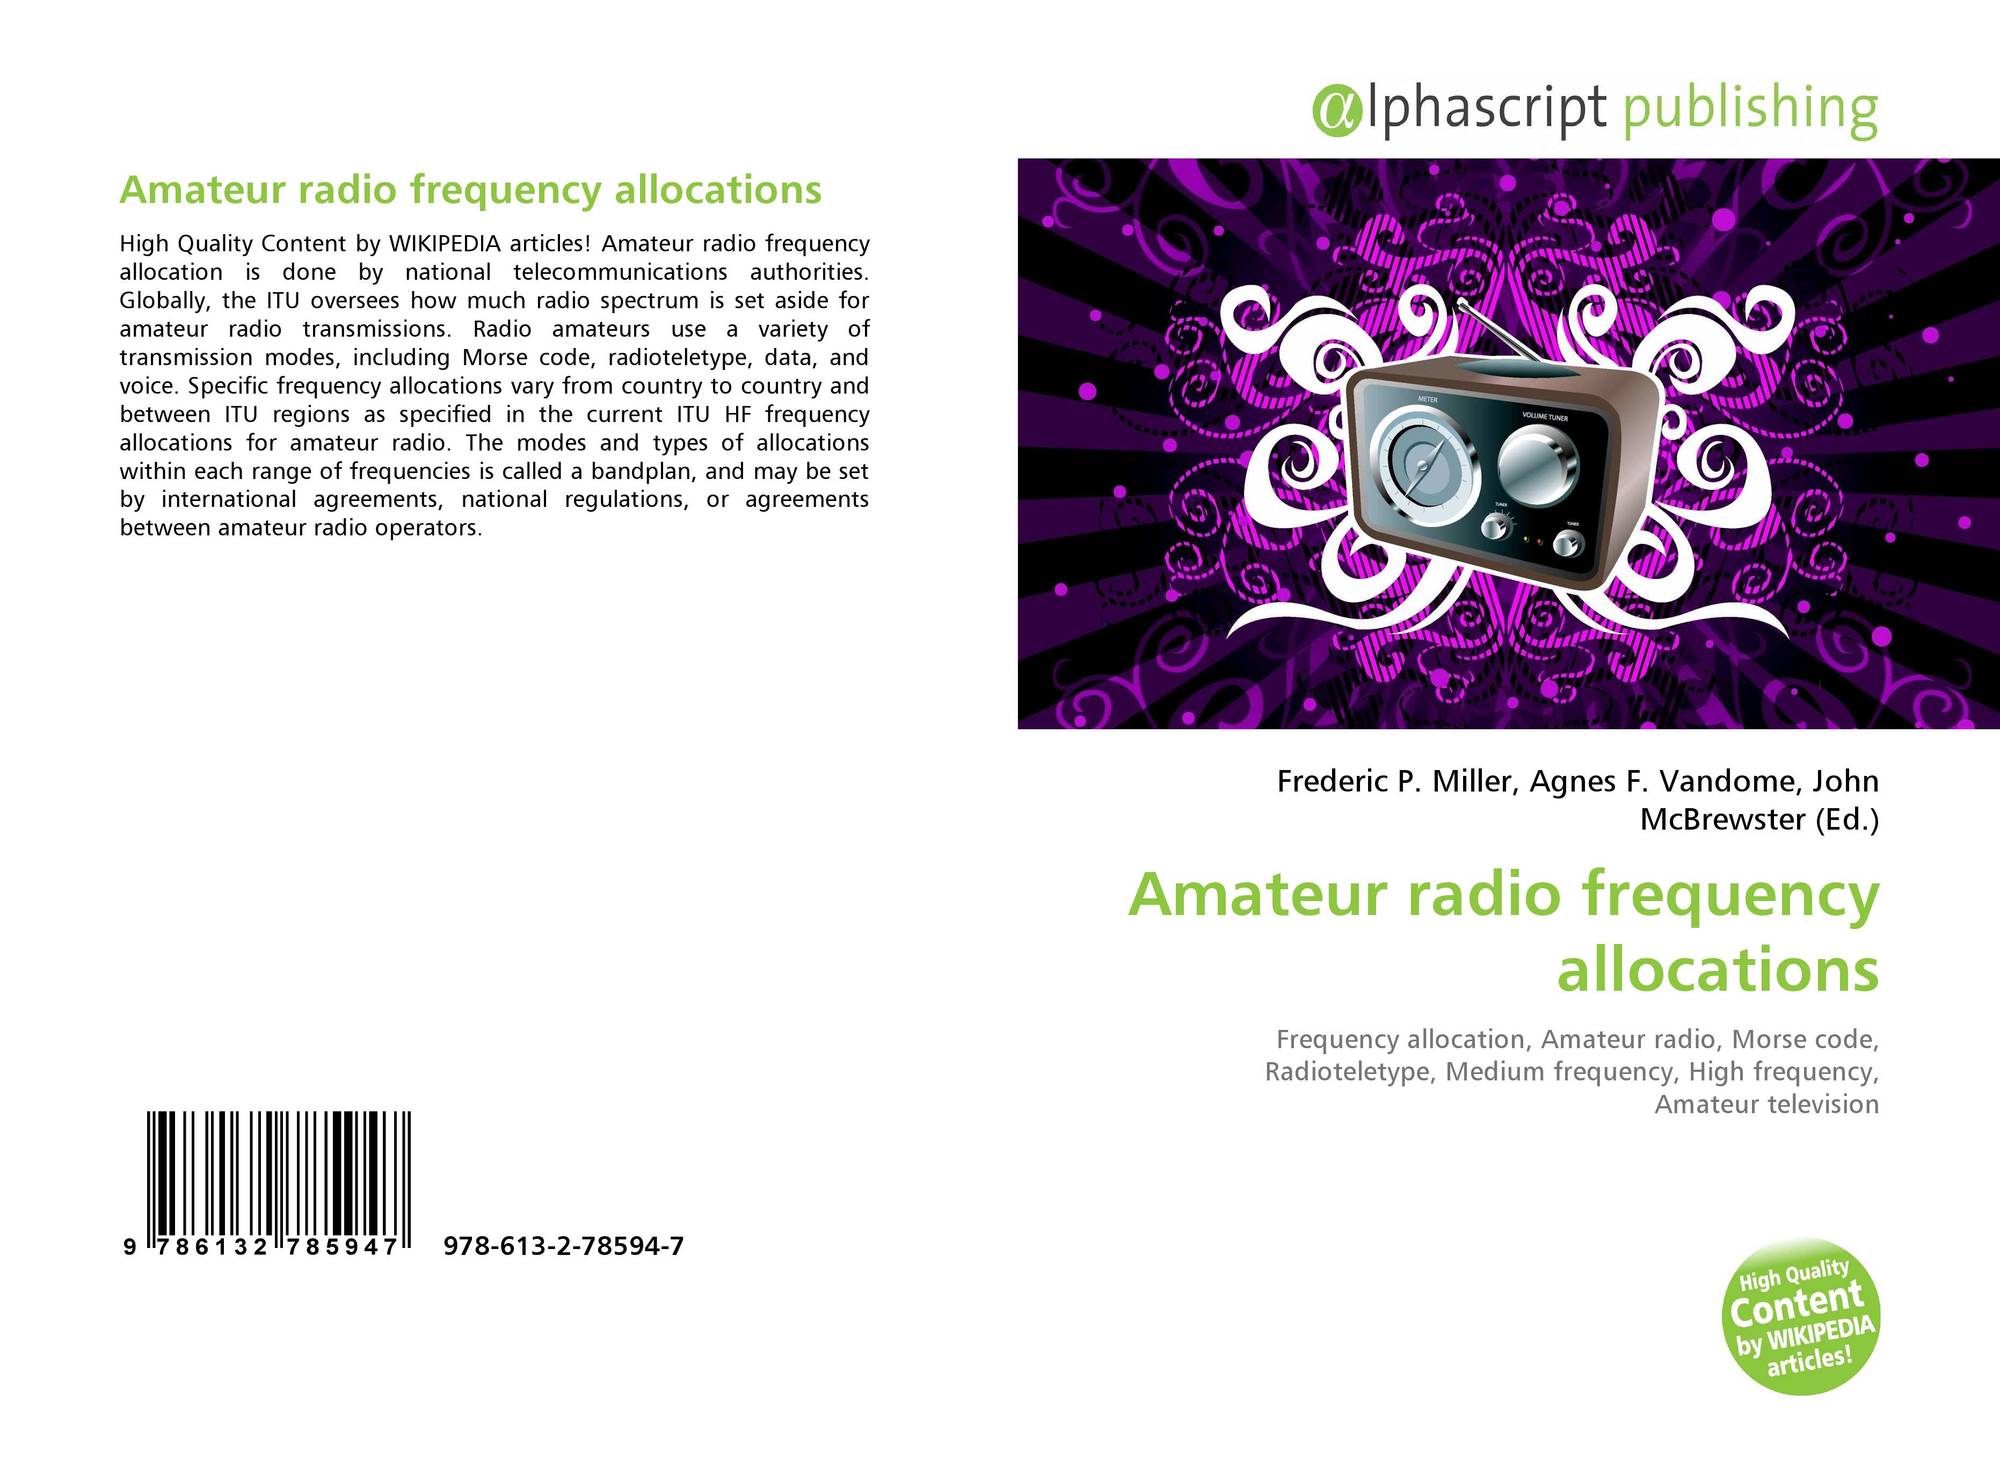 Amateur frequency allocations